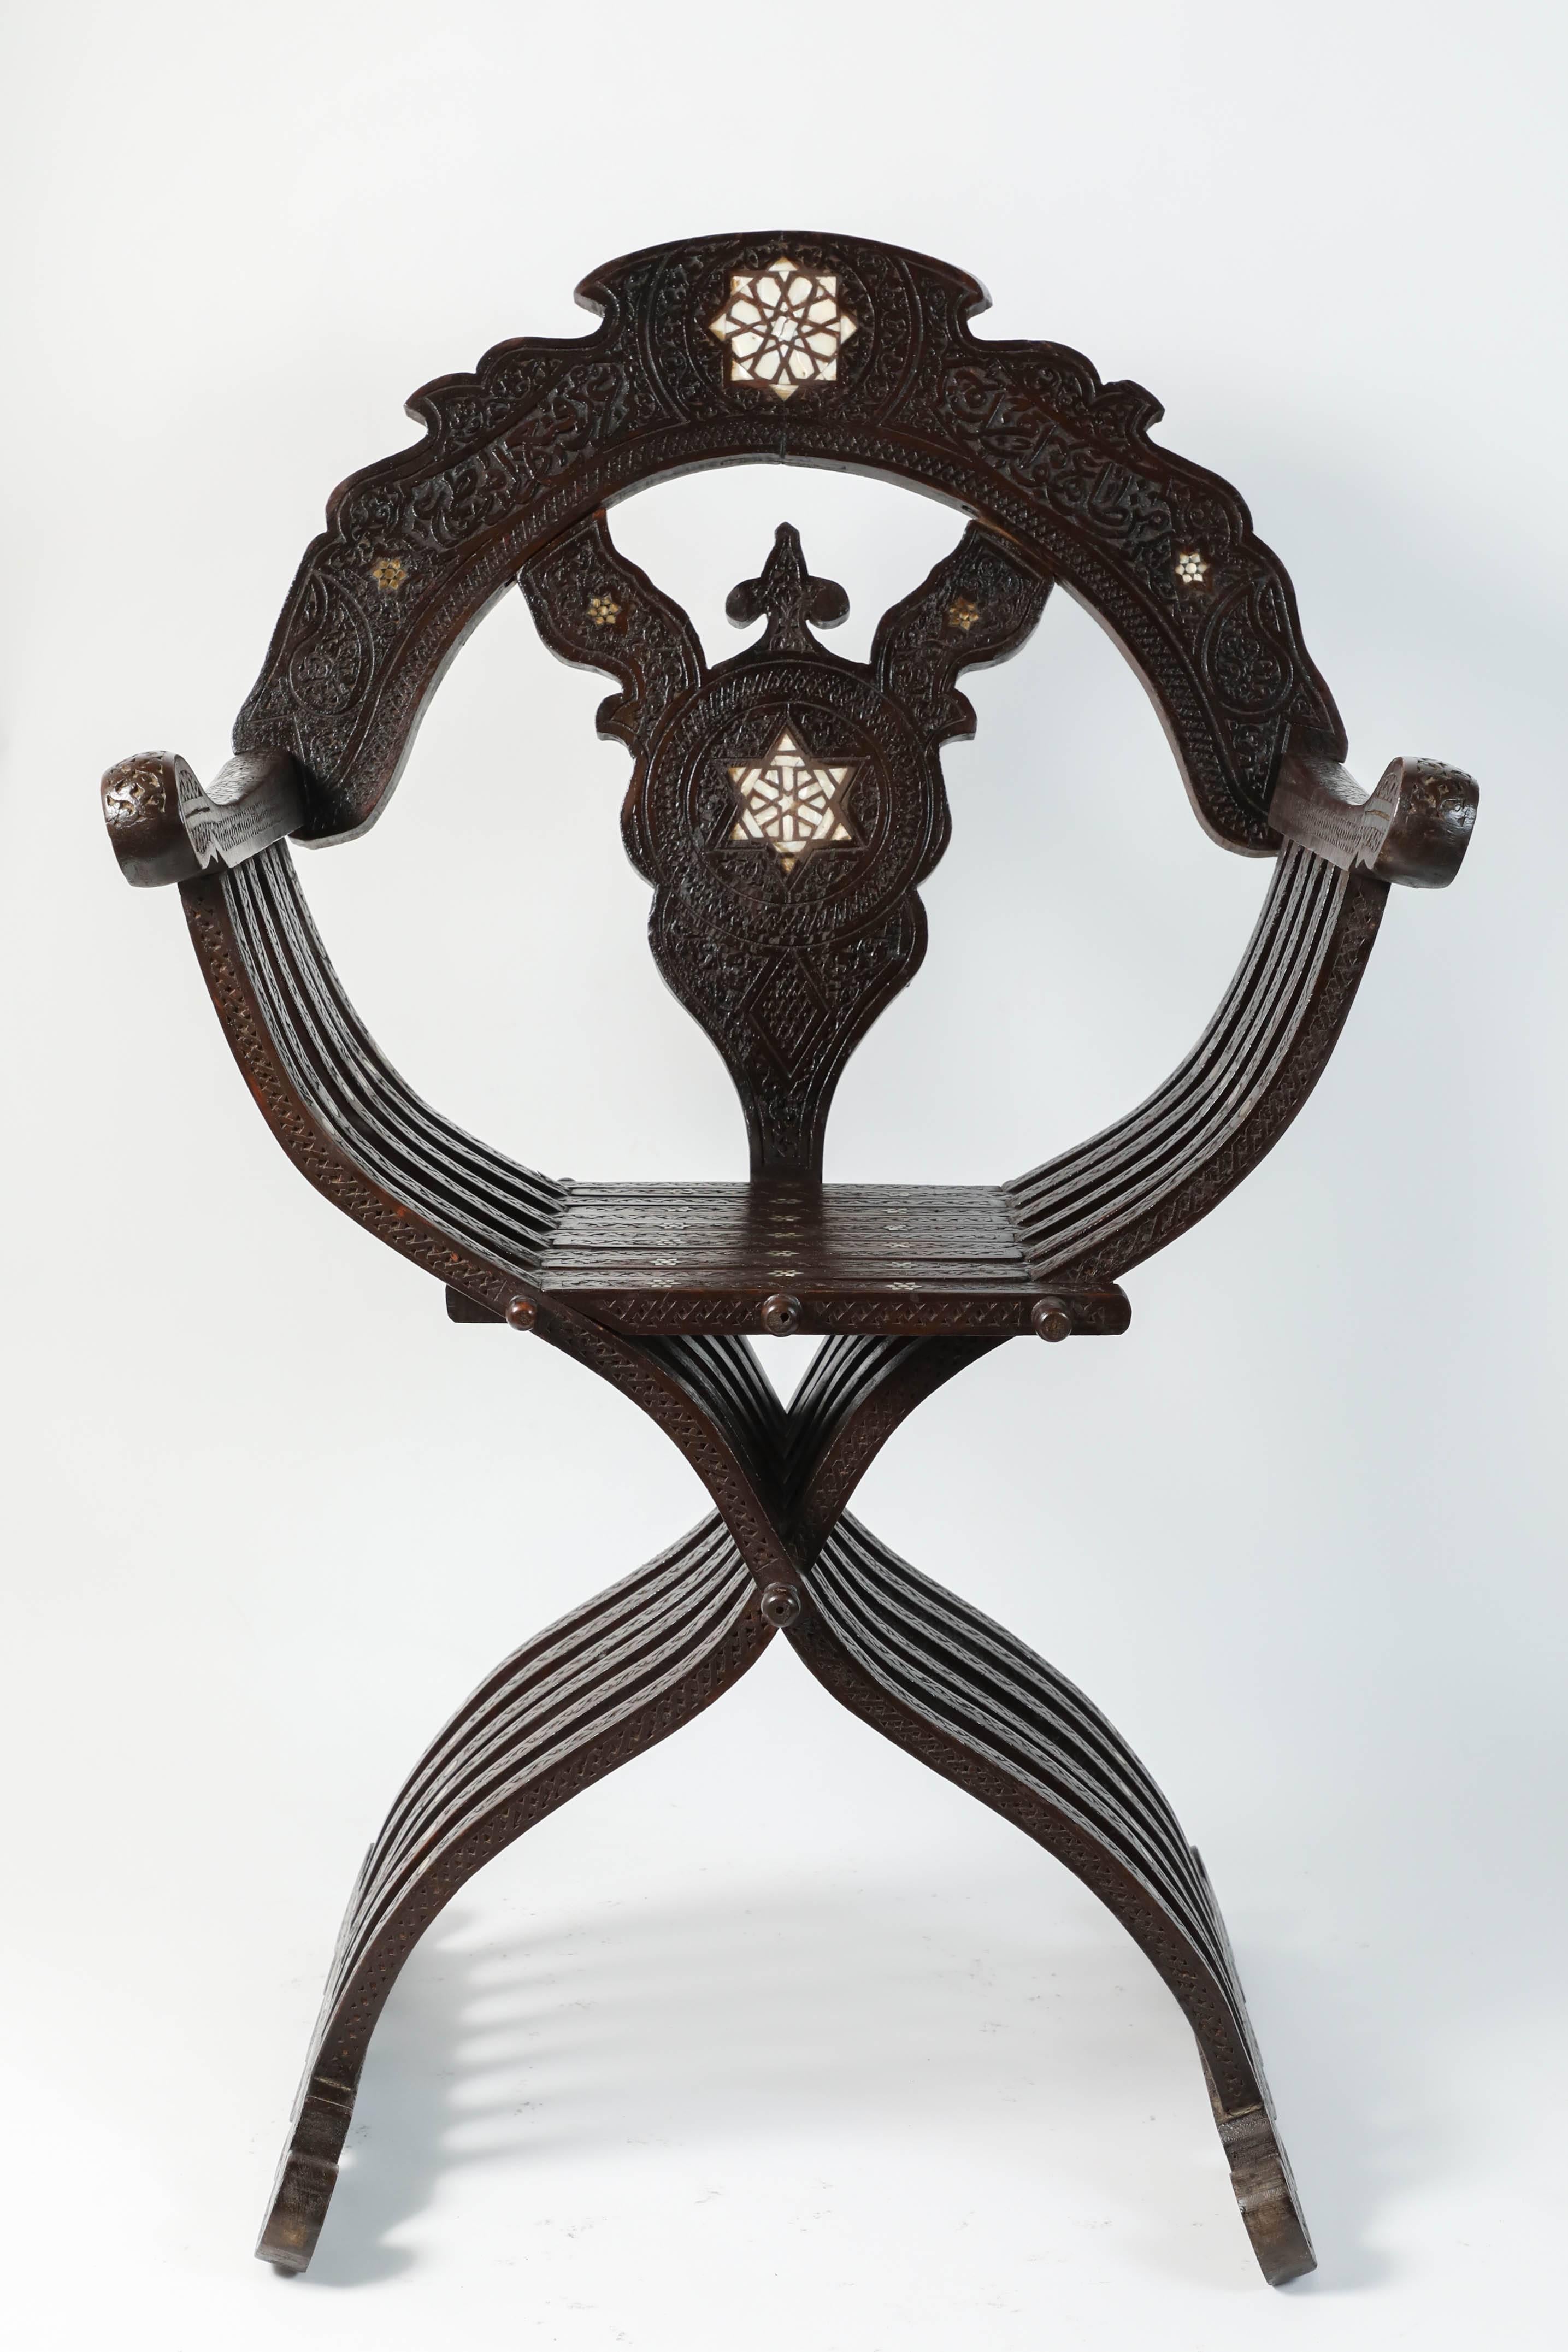 Antique handcrafted 19th century Syrian throne armchair hand-carved and inlaid with mother-of-pearl on solid walnut wood.
Middle Eastern armchair with inlaid mother-of-pearl in Star of David insets, cut-out back hand-carved with Arabic calligraphy